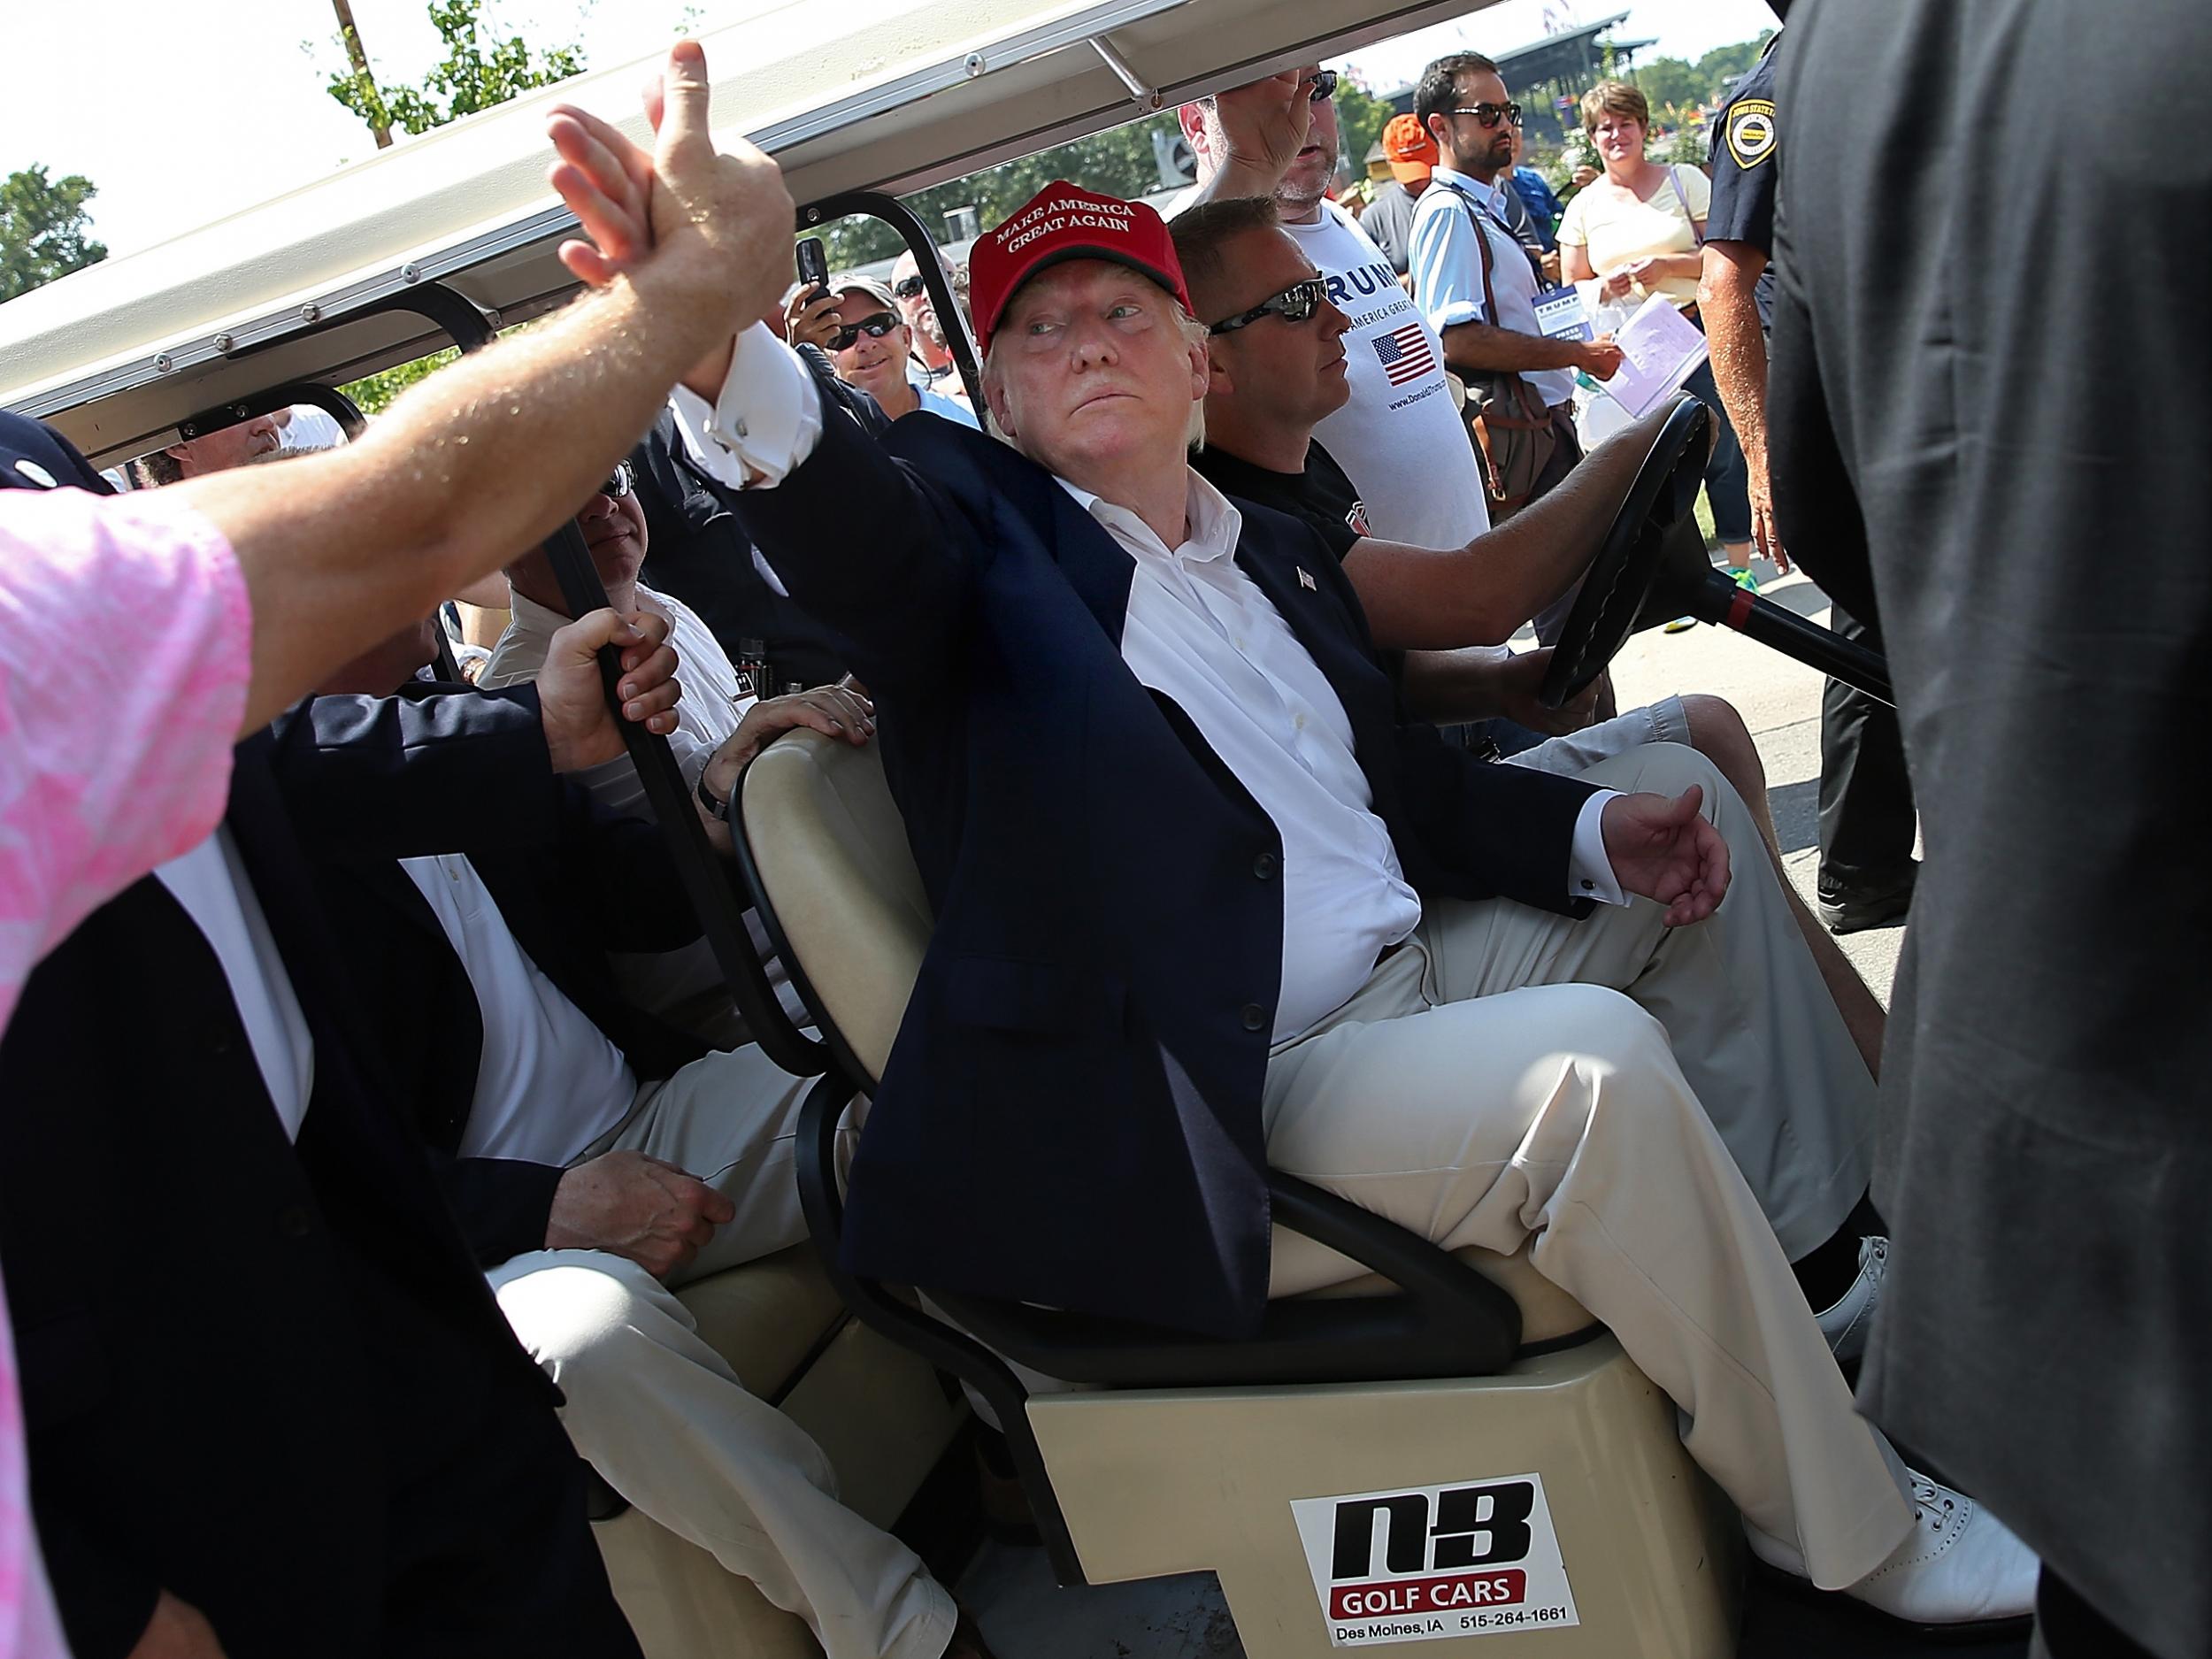 The agency has reportedly made other golf-related purchases, spending $15,600 on the installation of ballistic glass for Mr Trump to watch the Presidents Cup gold competition